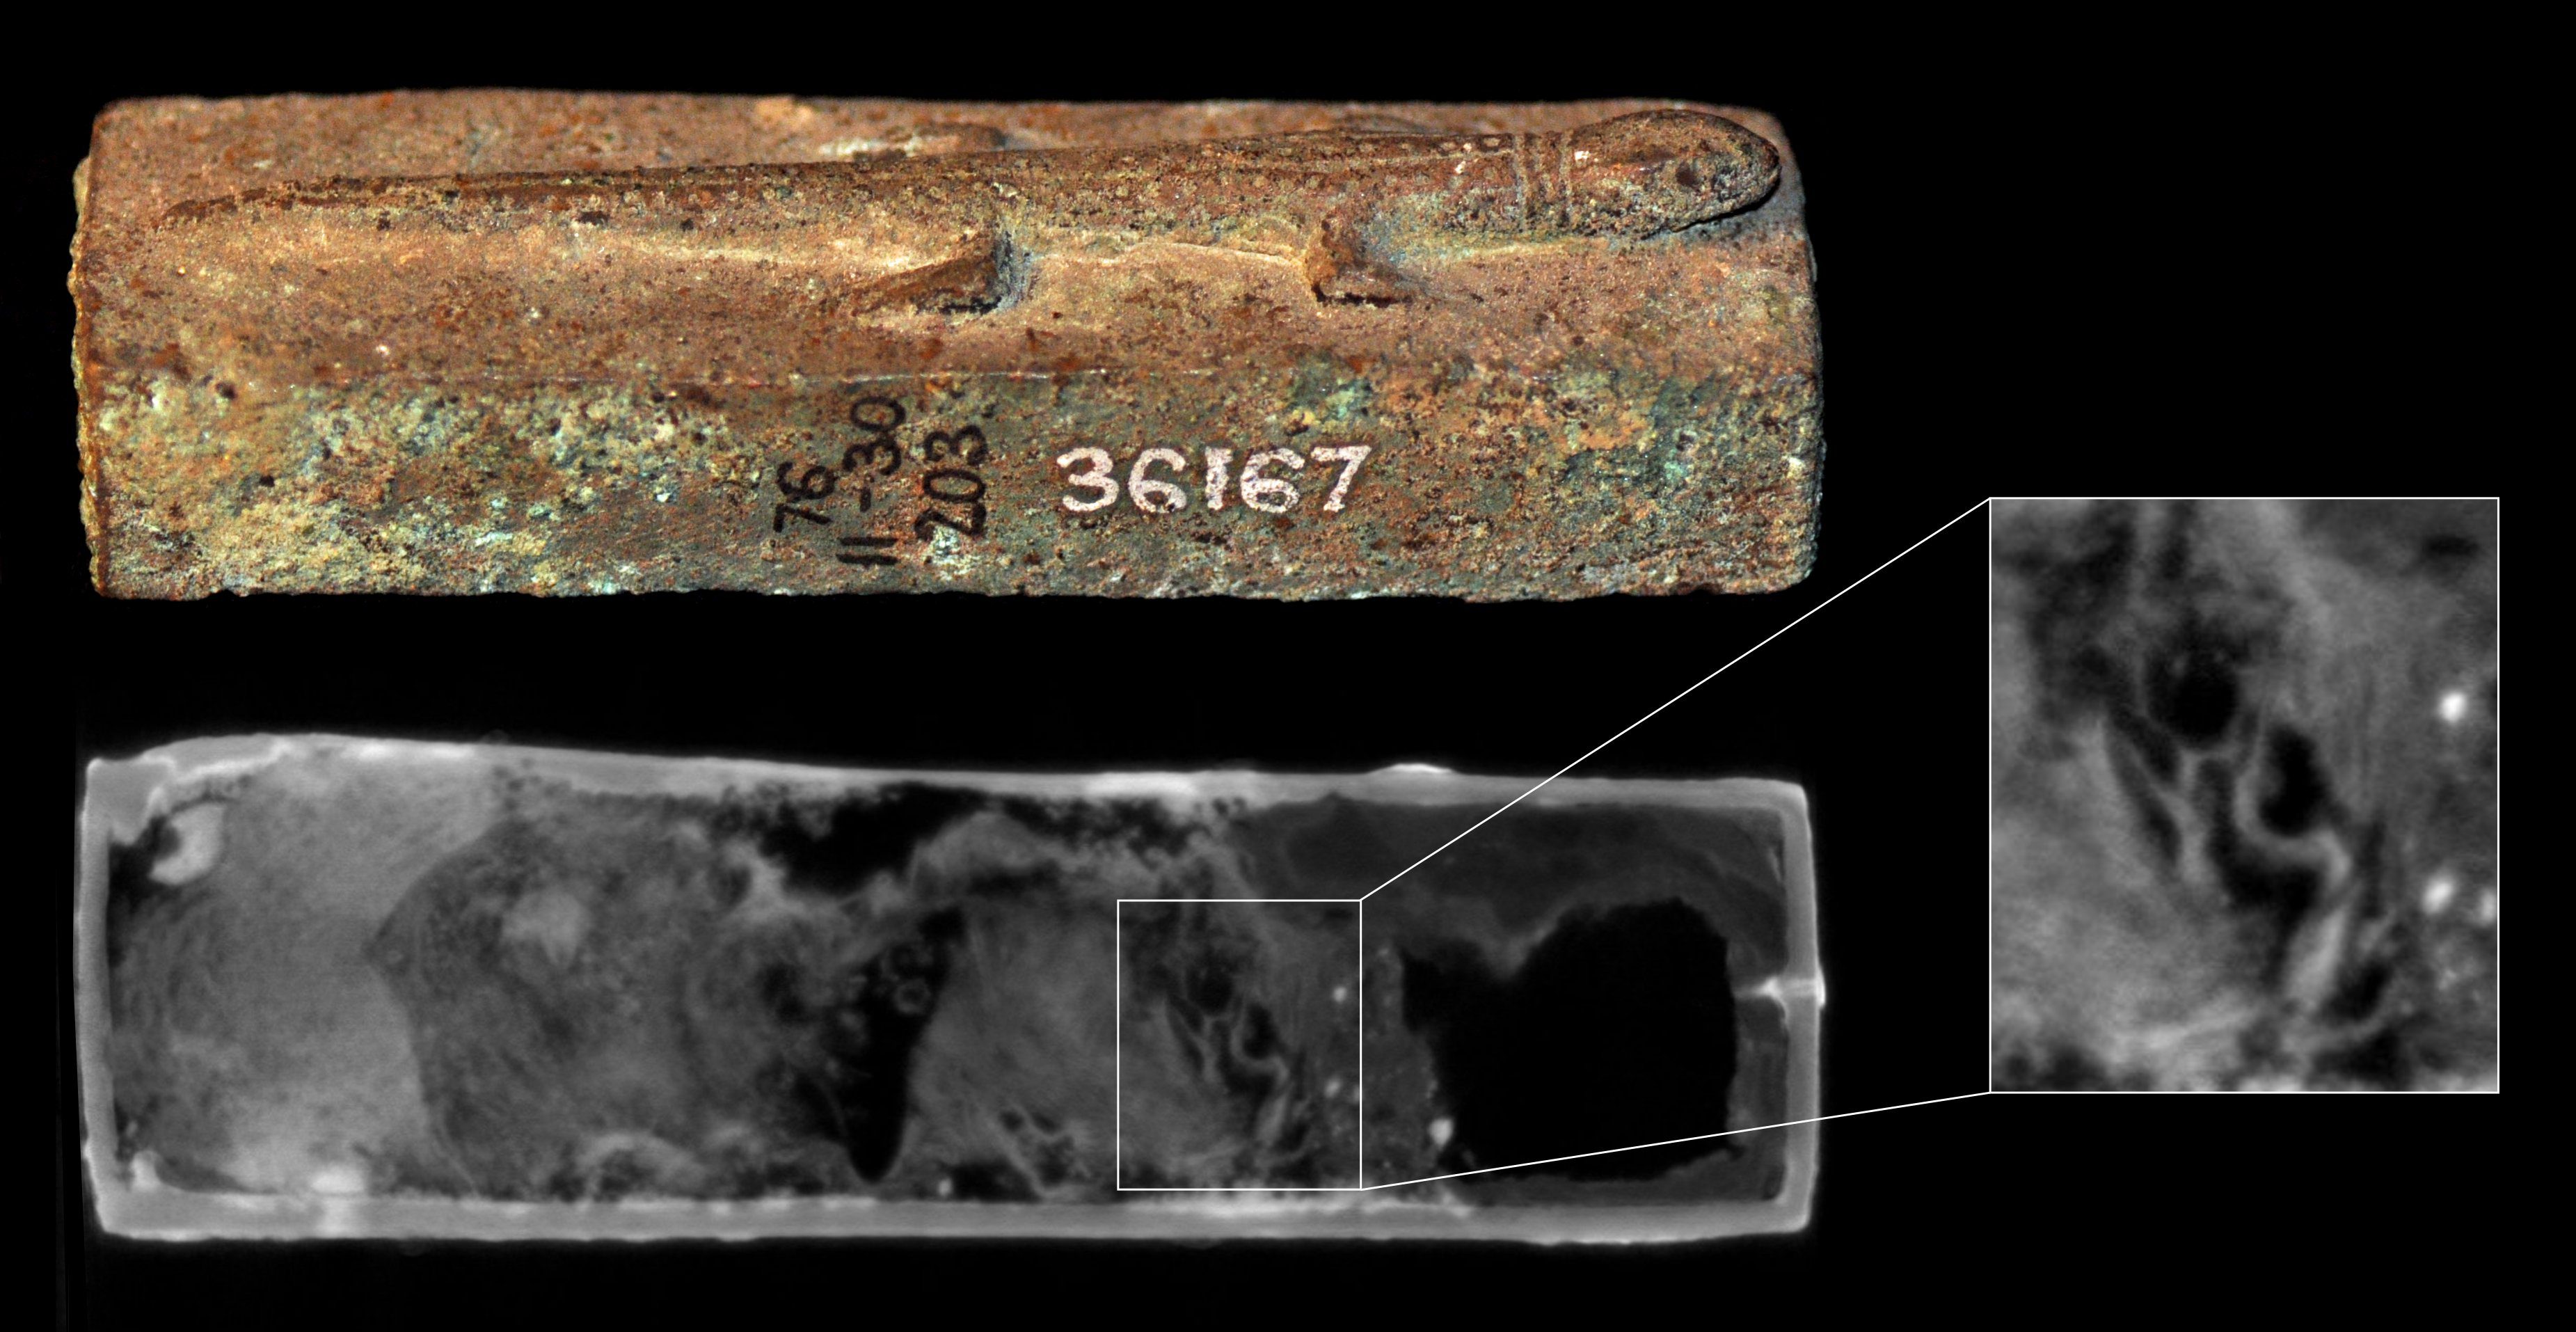 The team used neutron imaging to reveal a lizard skull (inset) in one of the coffins. 